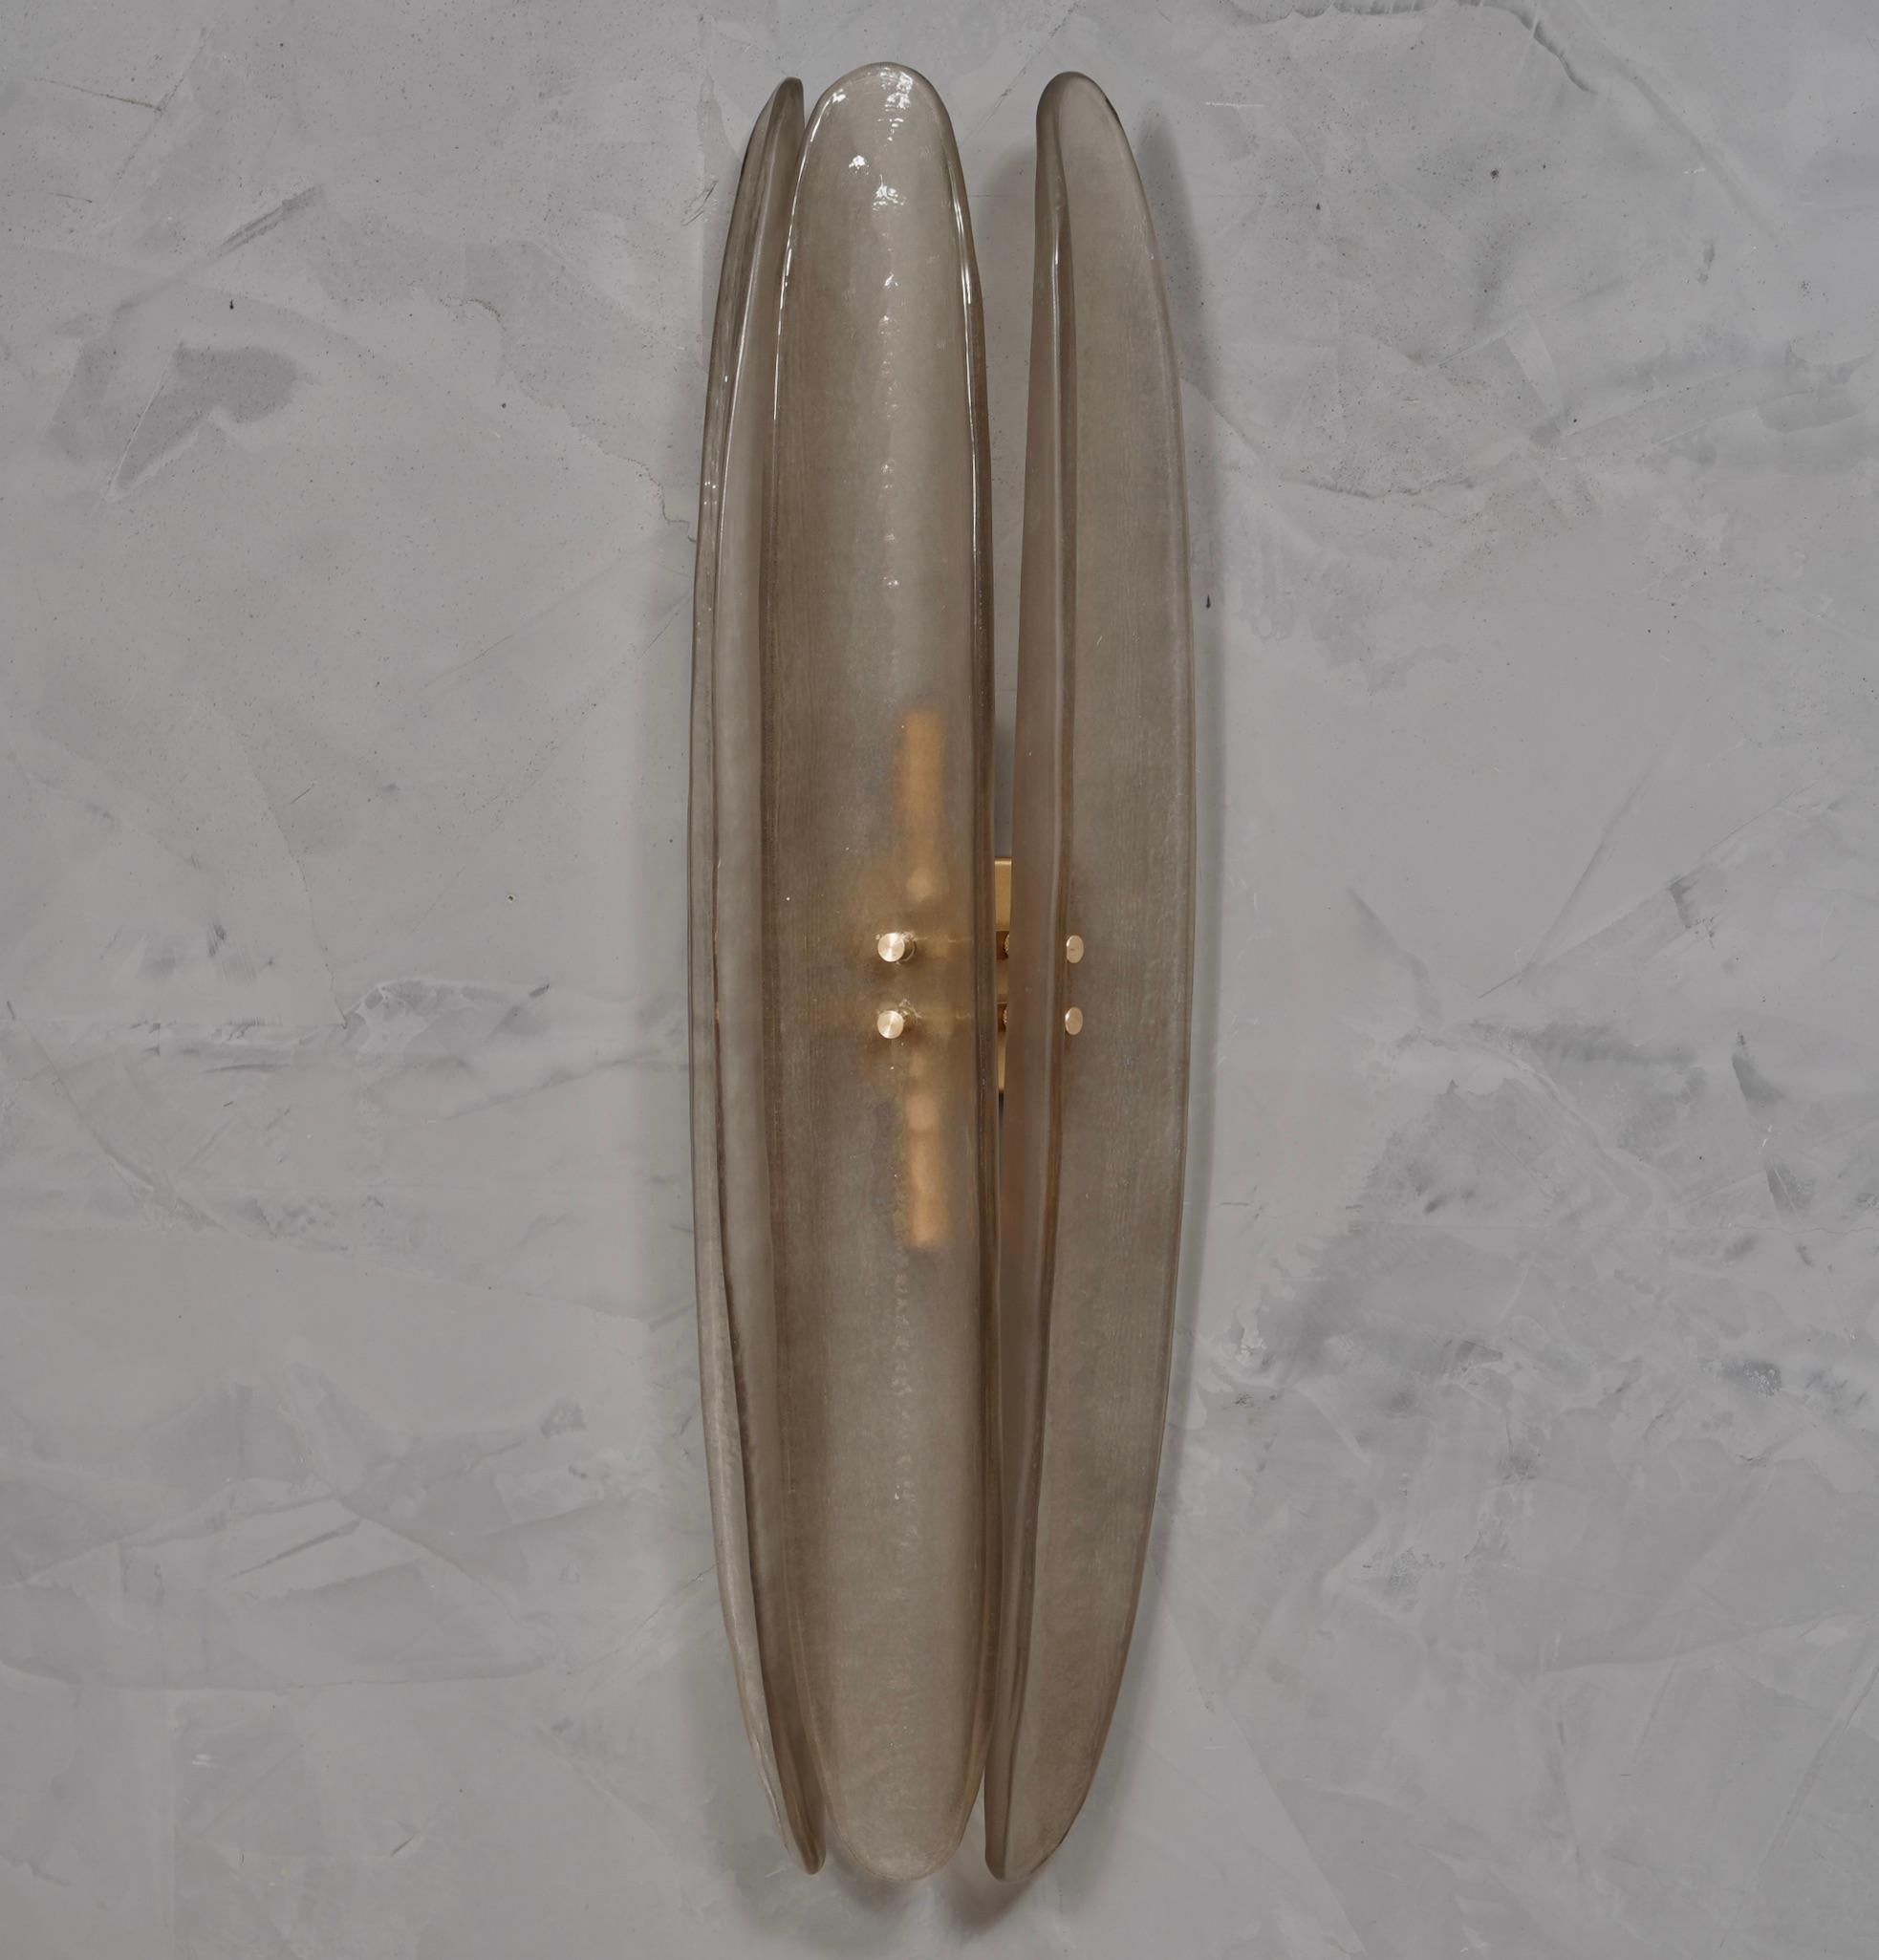 Very original Murano glass wall lamp with a very elongated design of the glass leaf and a unique smoky color.

The applique is composed of a gold-colored metal structure to which three very particular Murano glass leaves have been attached; the